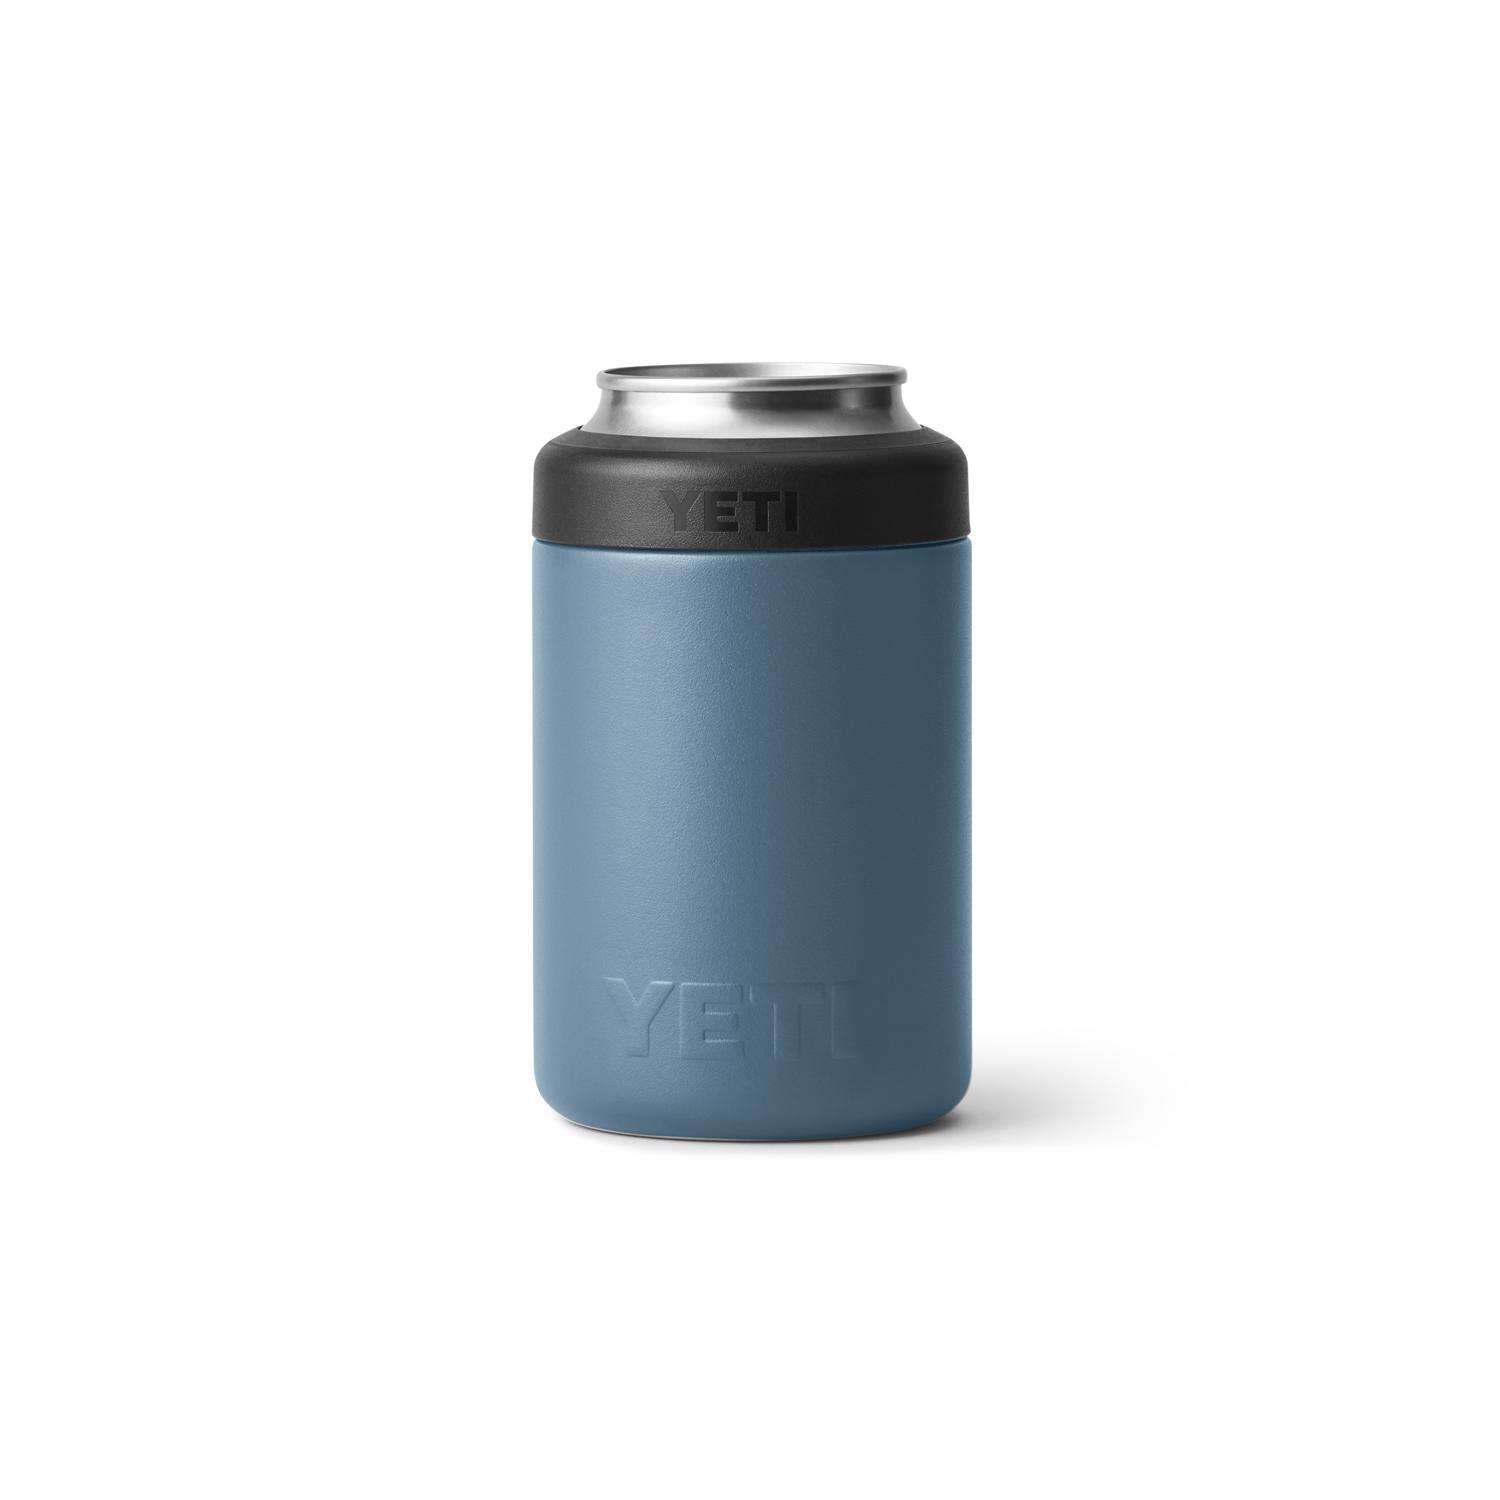 Cocktail Shaker $60 : r/YetiCoolers